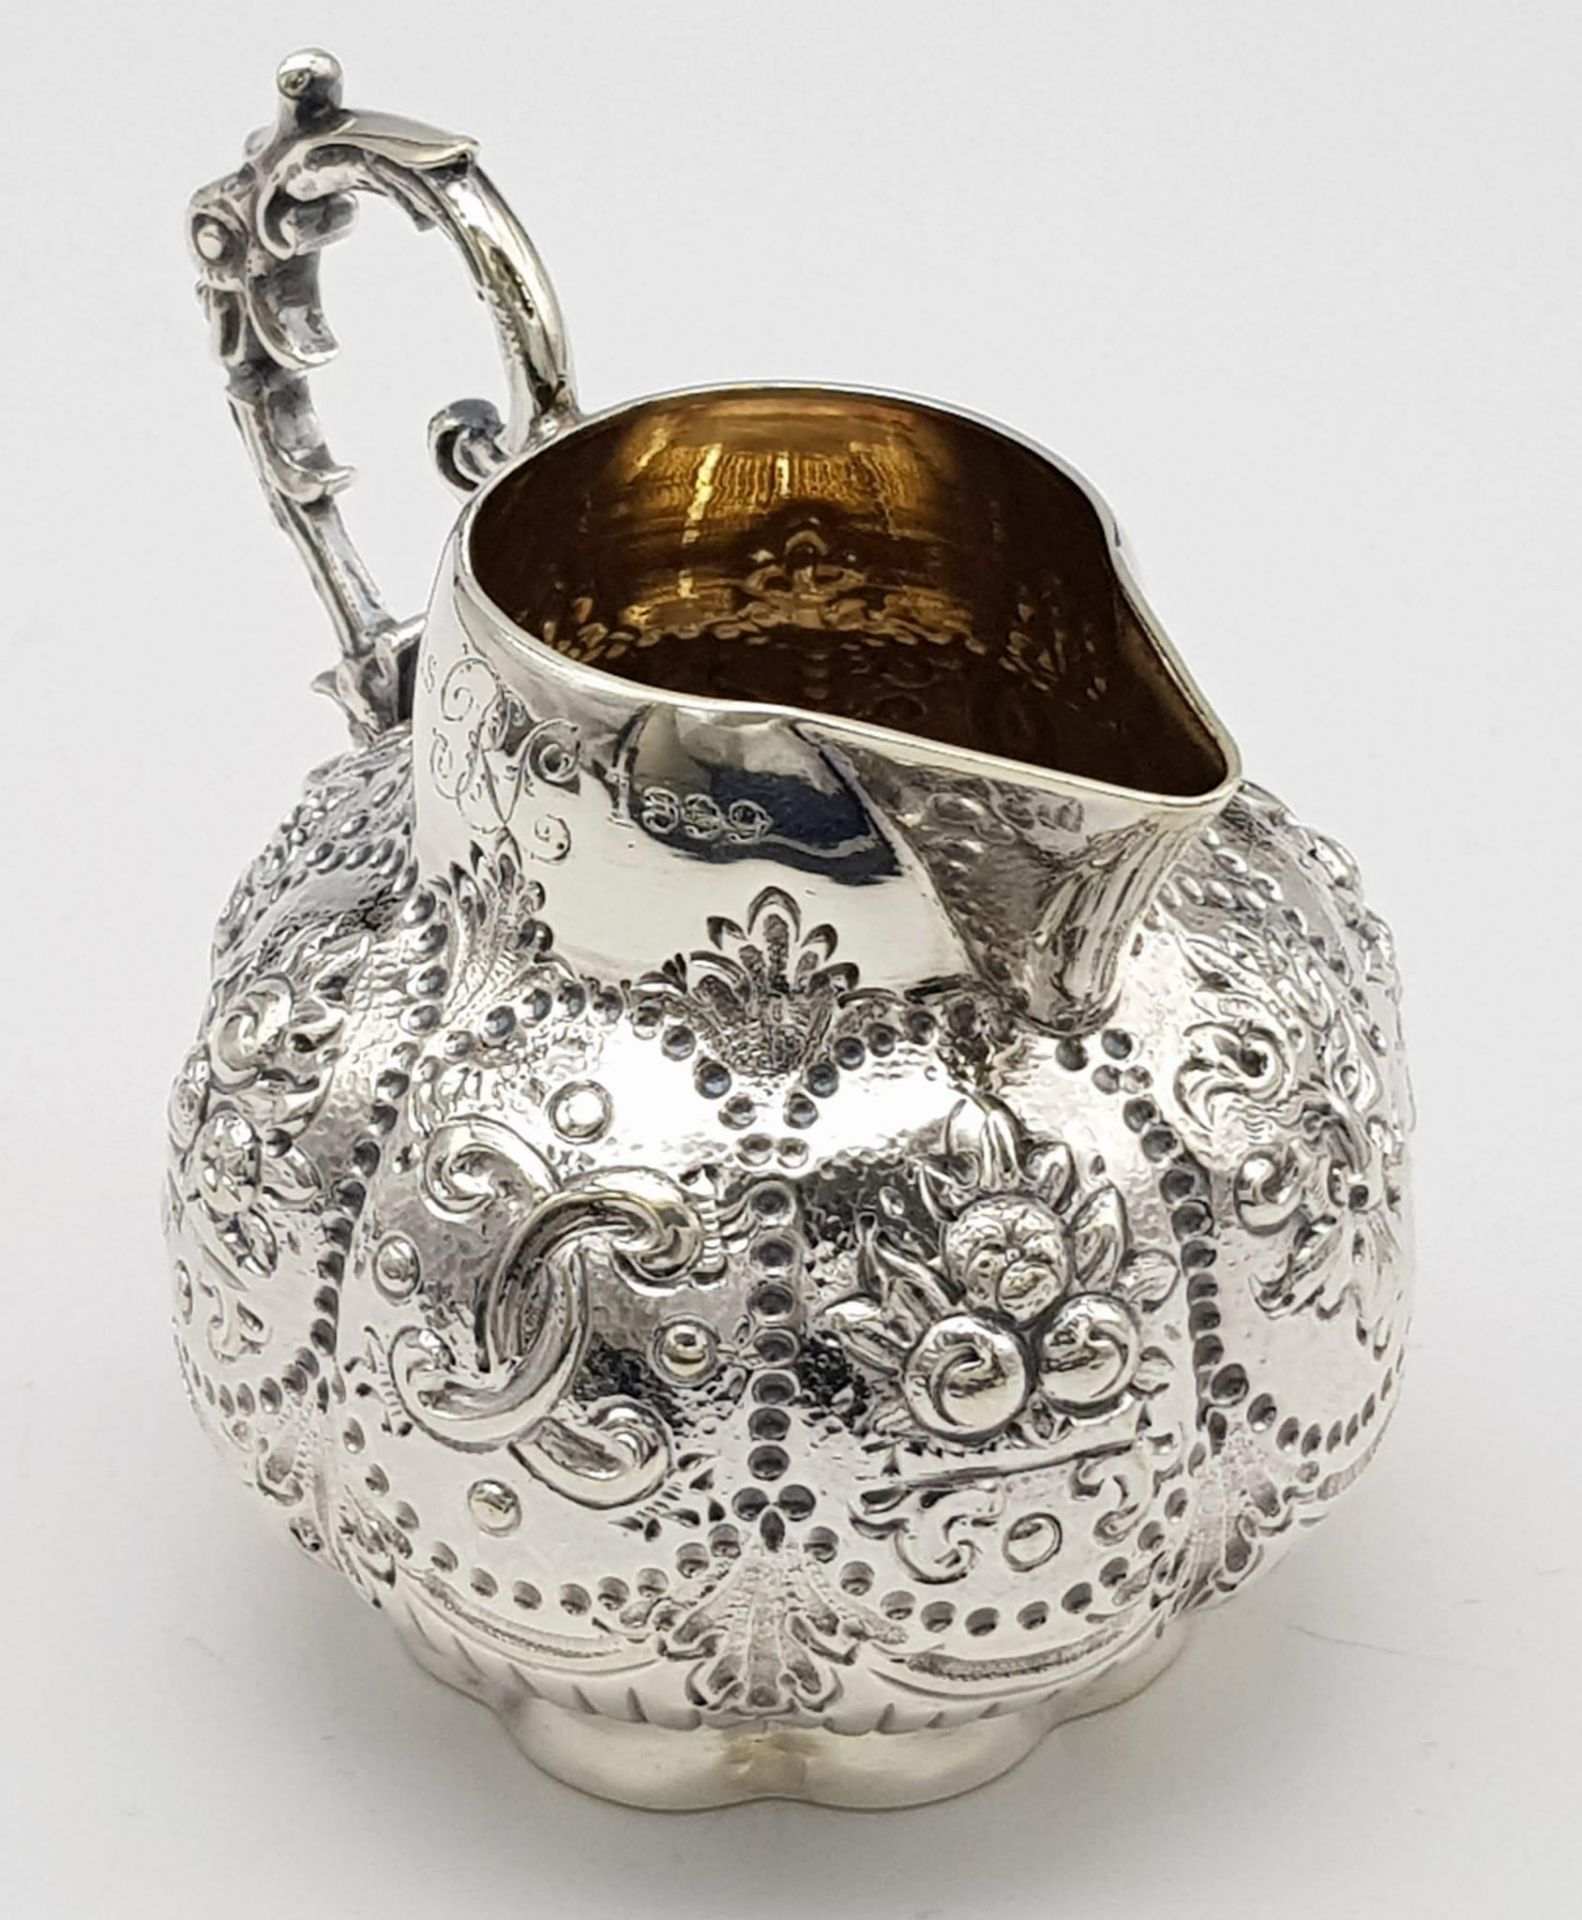 A SMALL SOLID SILVER JUG WITH THE INSCRIPTION "XMAS 1899" ALTHOUGH THE HALLMARK IS DATED 1891 WITH - Image 2 of 9